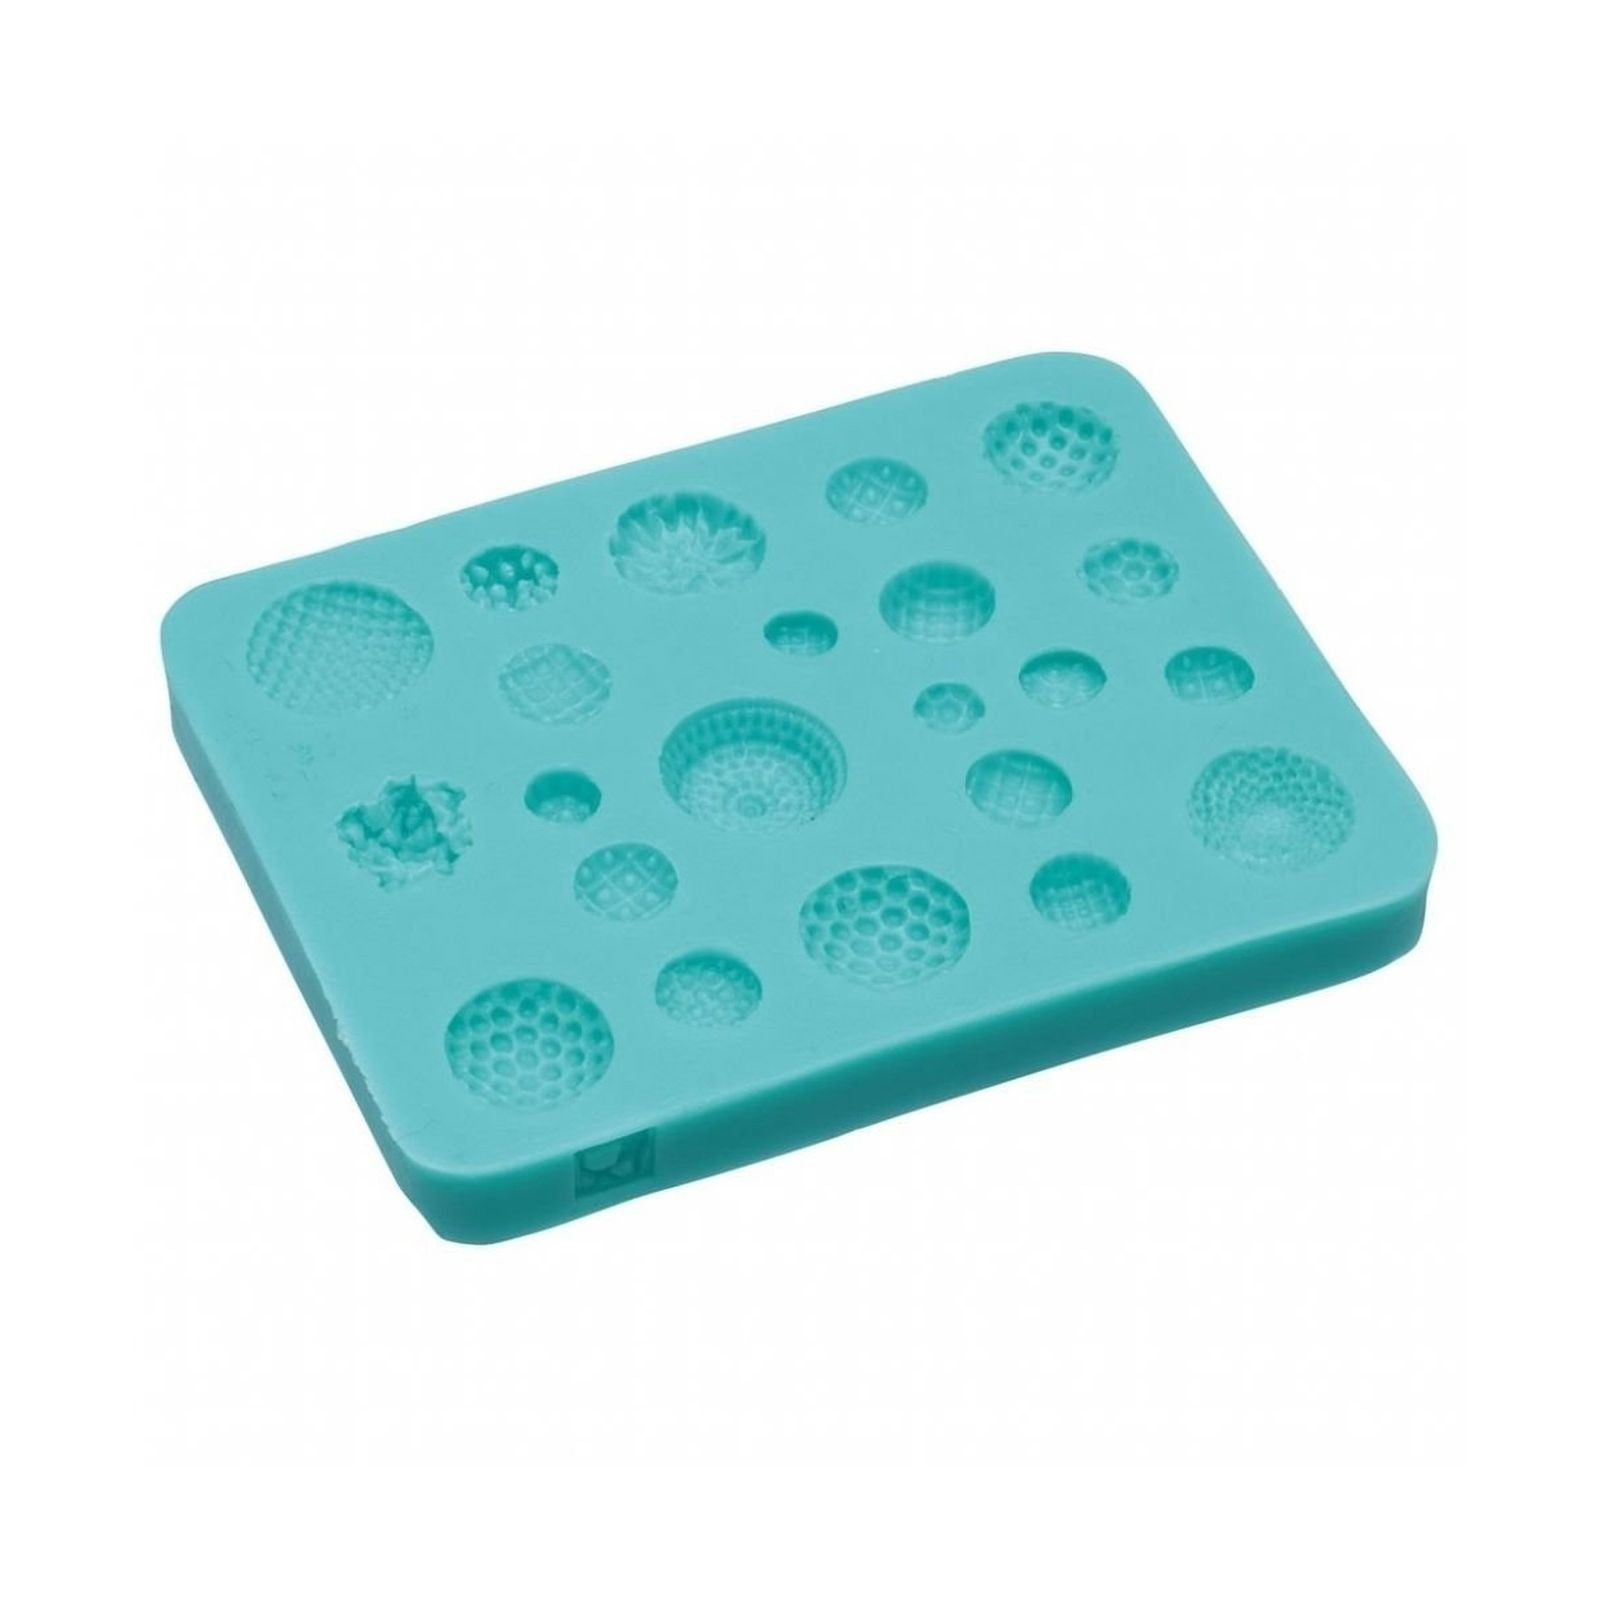 Kitchen Craft Sweetly does it-Buttons Easy Press Fondant Mould - The Cooks Cupboard Ltd